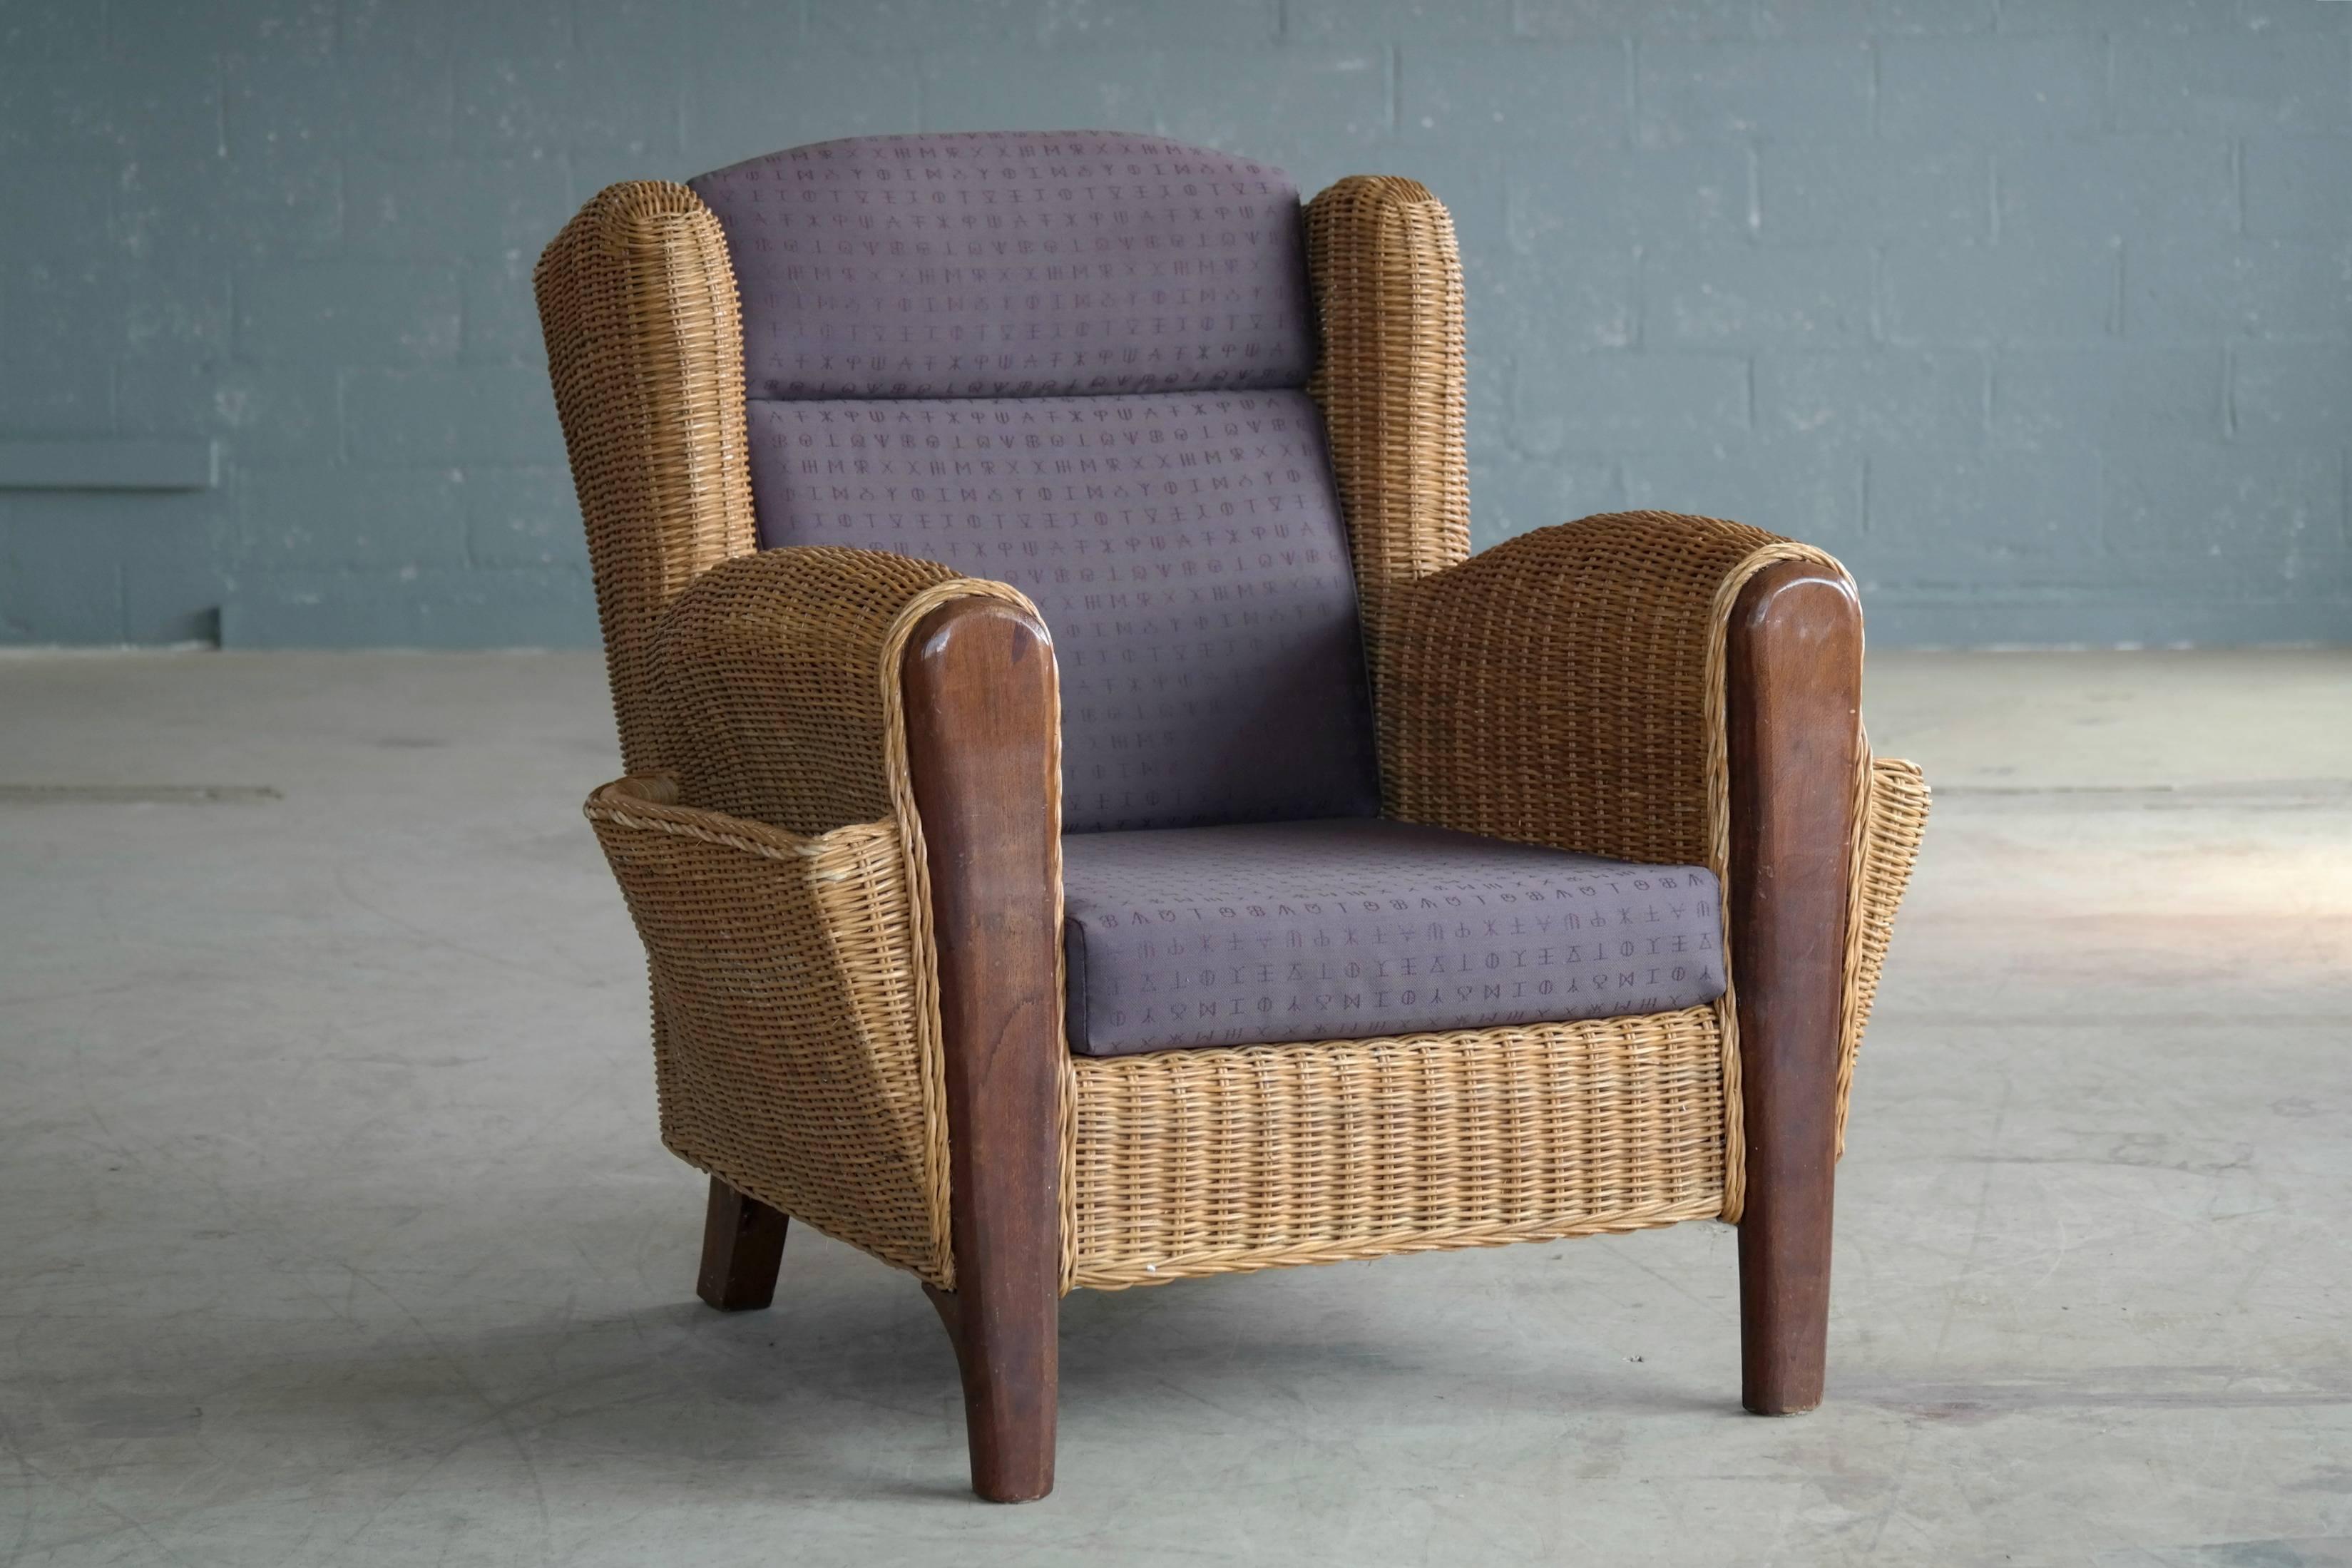 Unusual and comfortable and very decorative Danish wicker arm og lounge chair with built in magazine pockets on the sides. Perfect for a relaxing afternoon on the porch or in the sun room. Cushions are firm and upholstered in a brown fabric. Chair